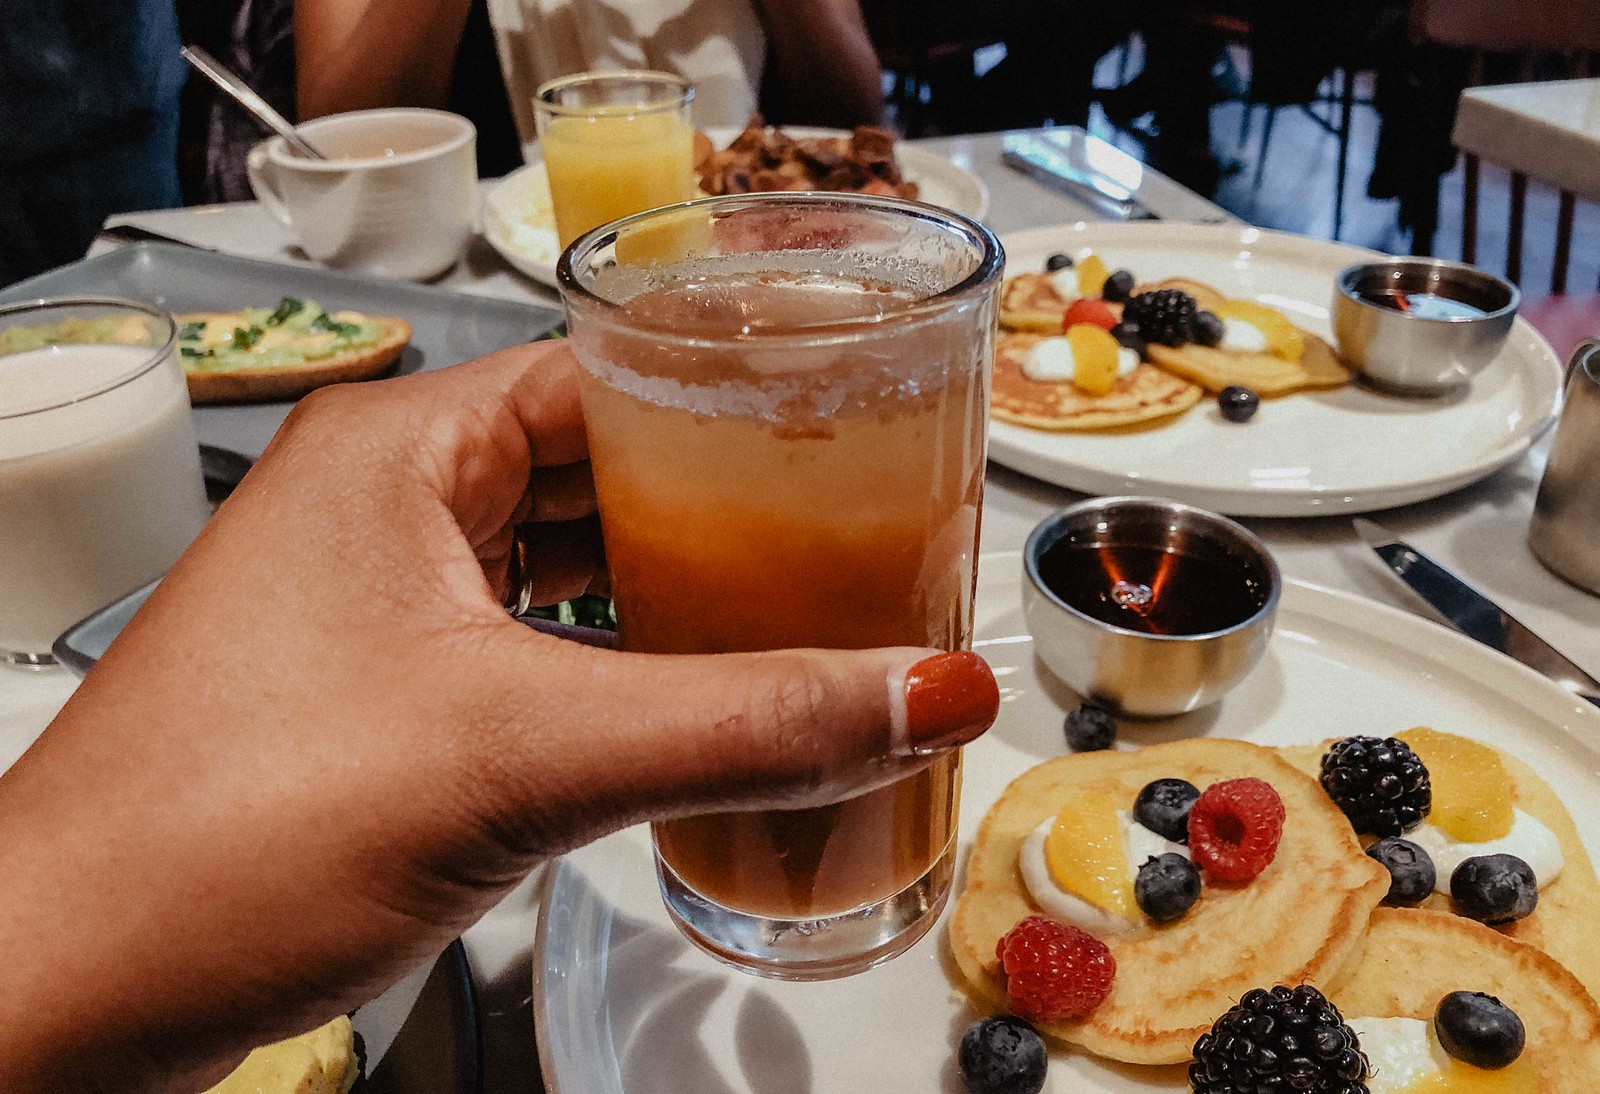 where to eat brunch in Charlotte